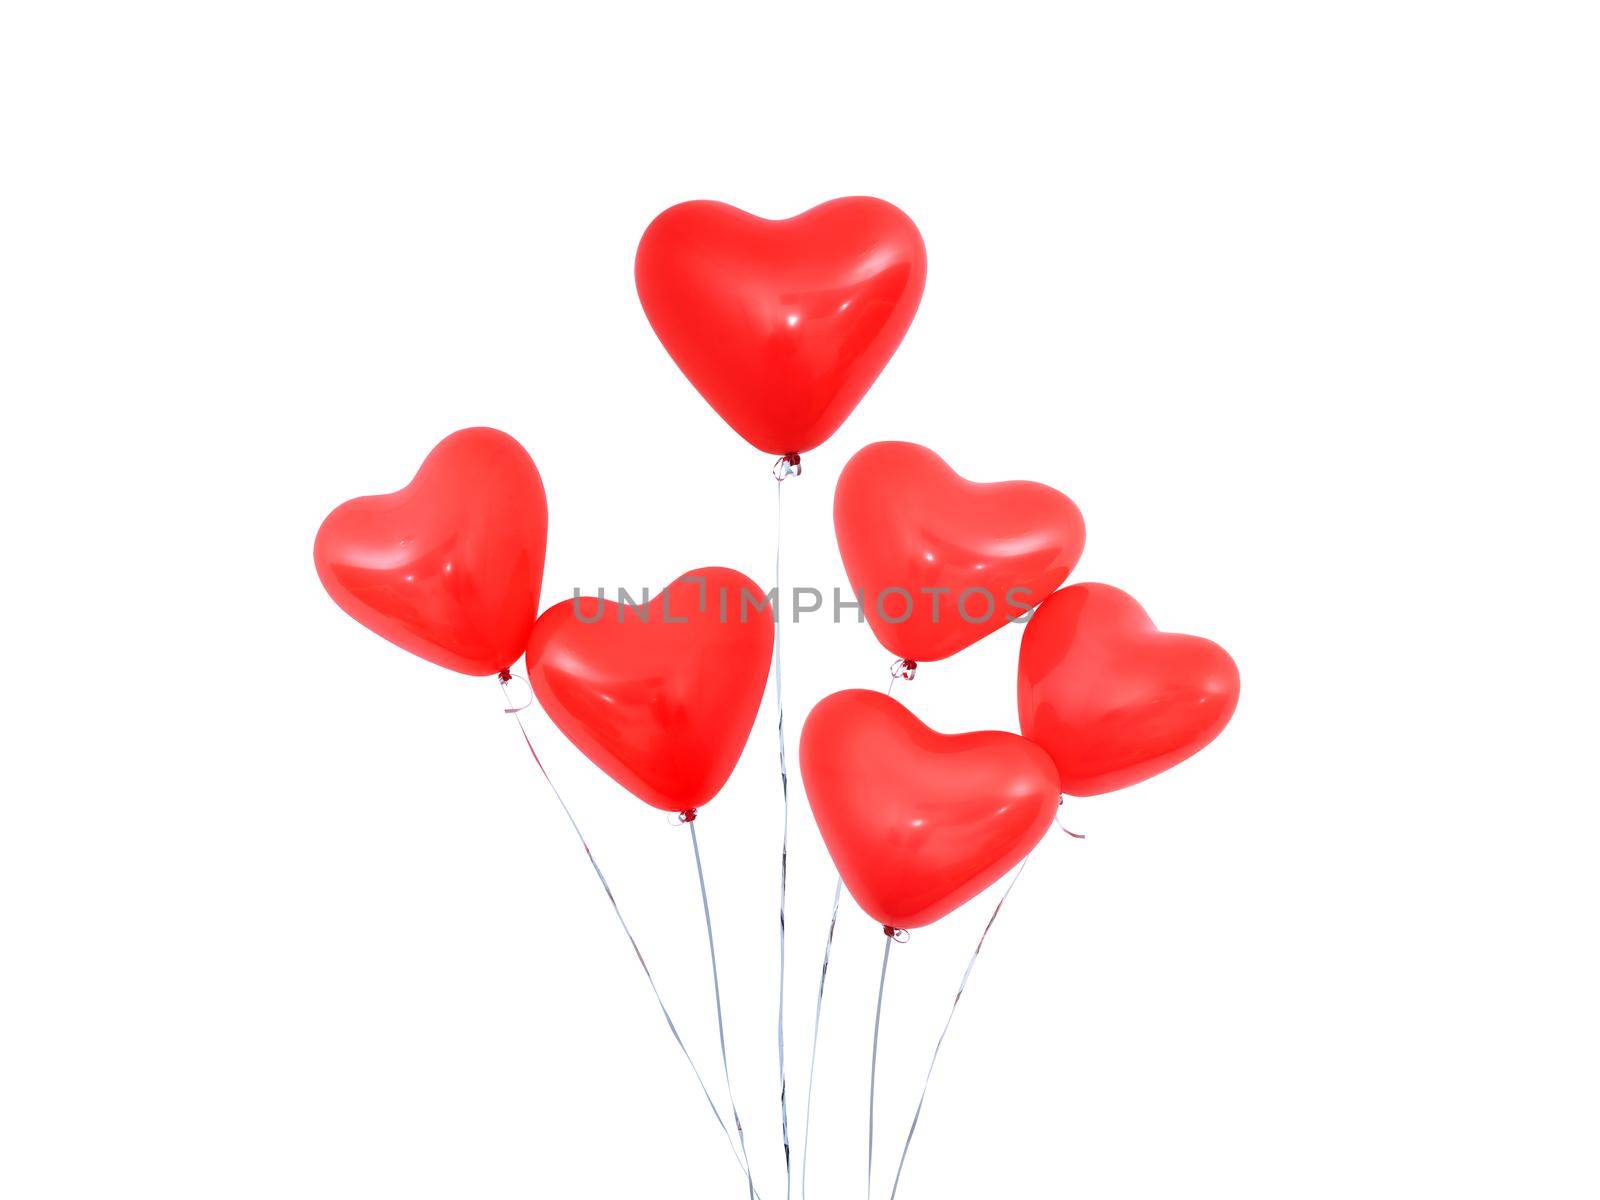 Red heart shaped helium balloon isolated on white background with ropes, Valentine's day, Mother's day, birthday party design concept. Clipping path. by ROMIXIMAGE